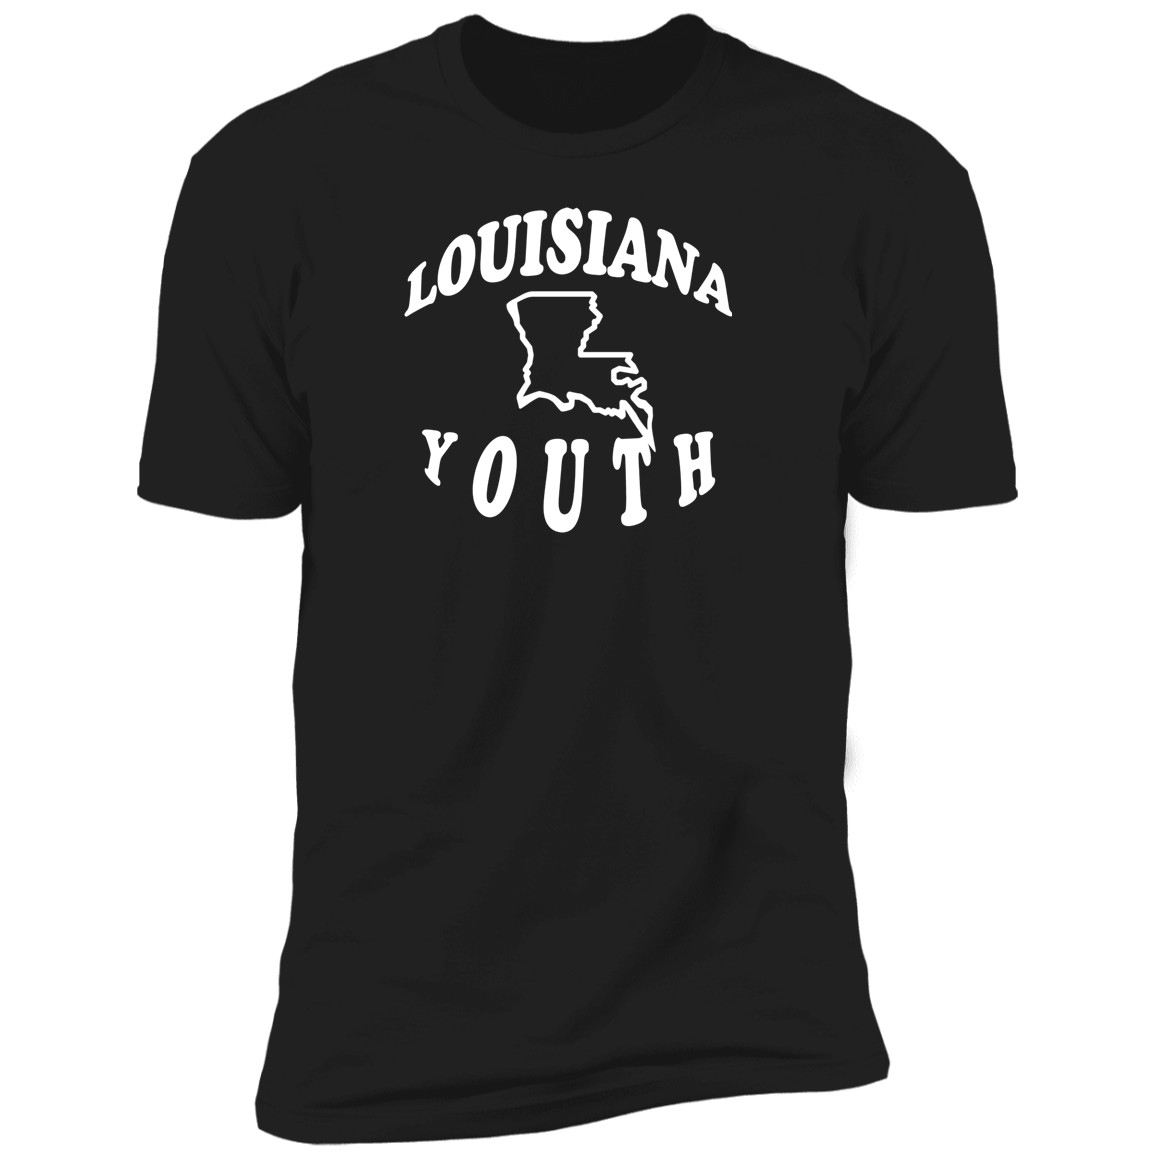 LA State - T-Shirts - Long Sleeve and Short Sleeve